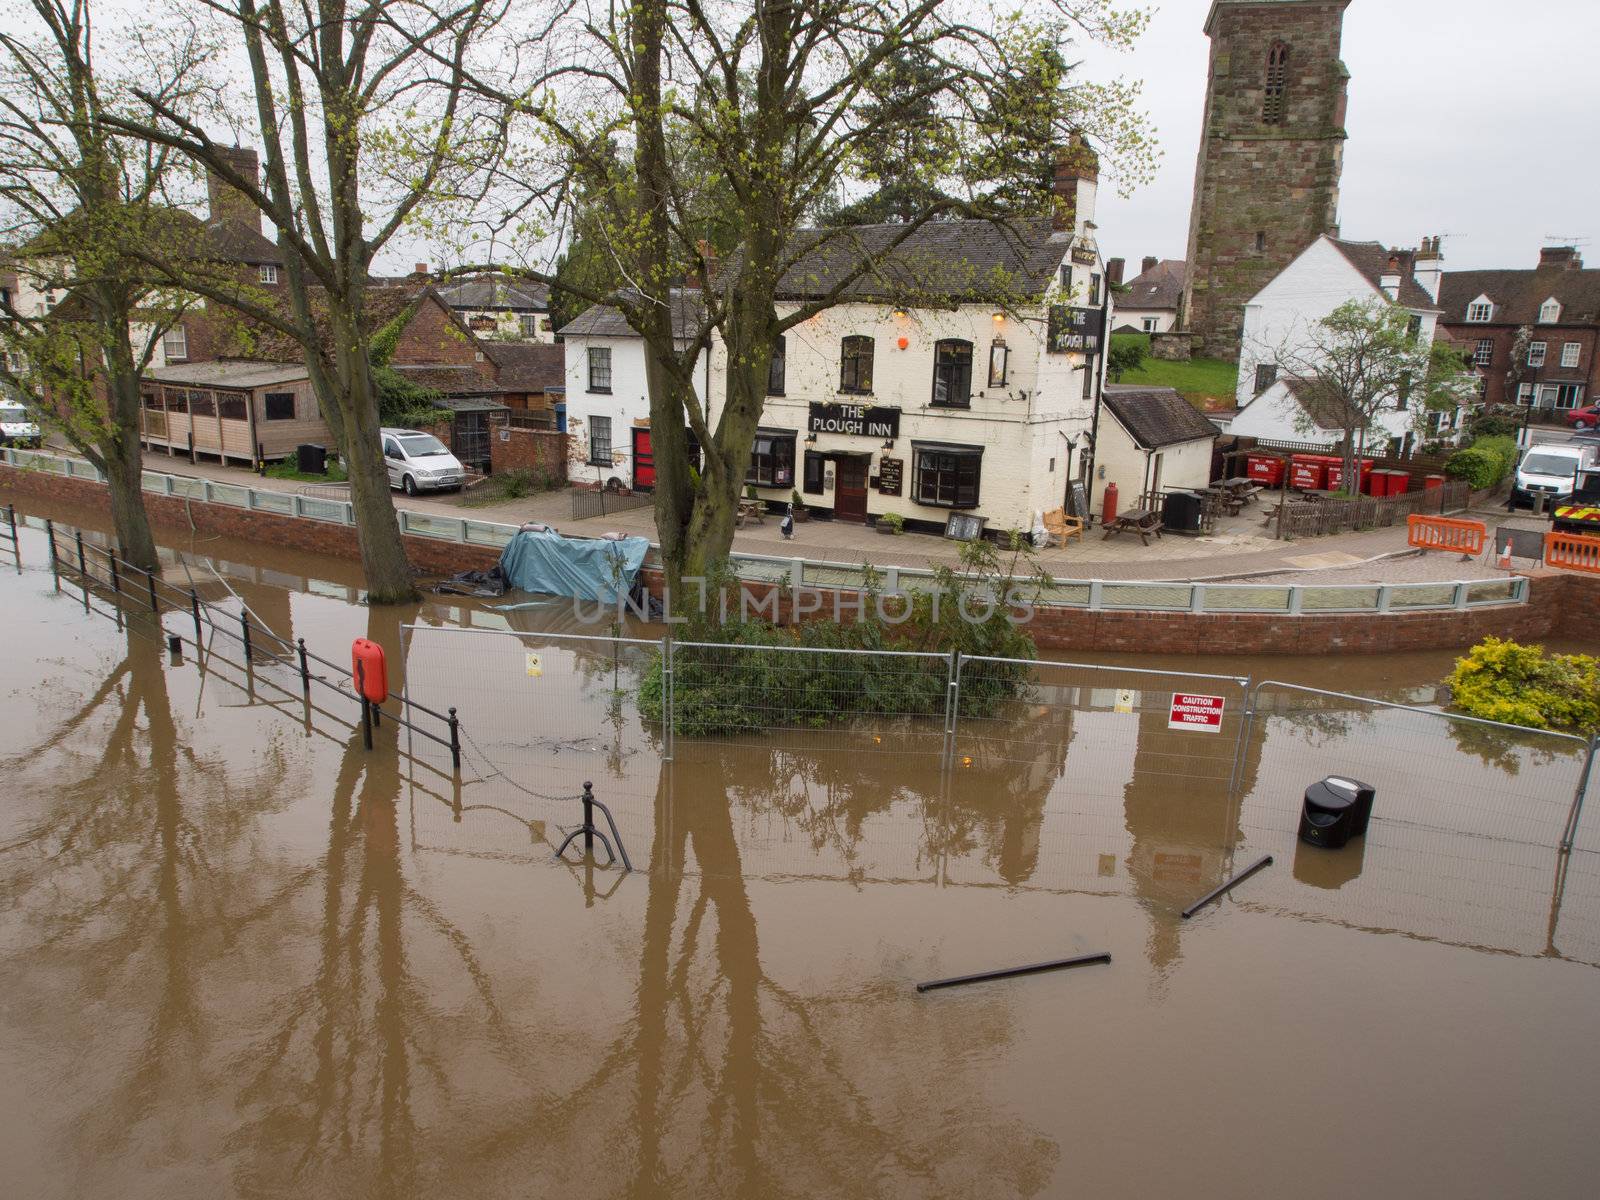 Upton Upon Severn, Worcestershire, UK on Wednesday 2nd May.  Pub saved by newly completed flood defenses being tested after recent record braking rainfall swells River Severn to bursting point.  Defenses are holding back the floodwater and protecting town.